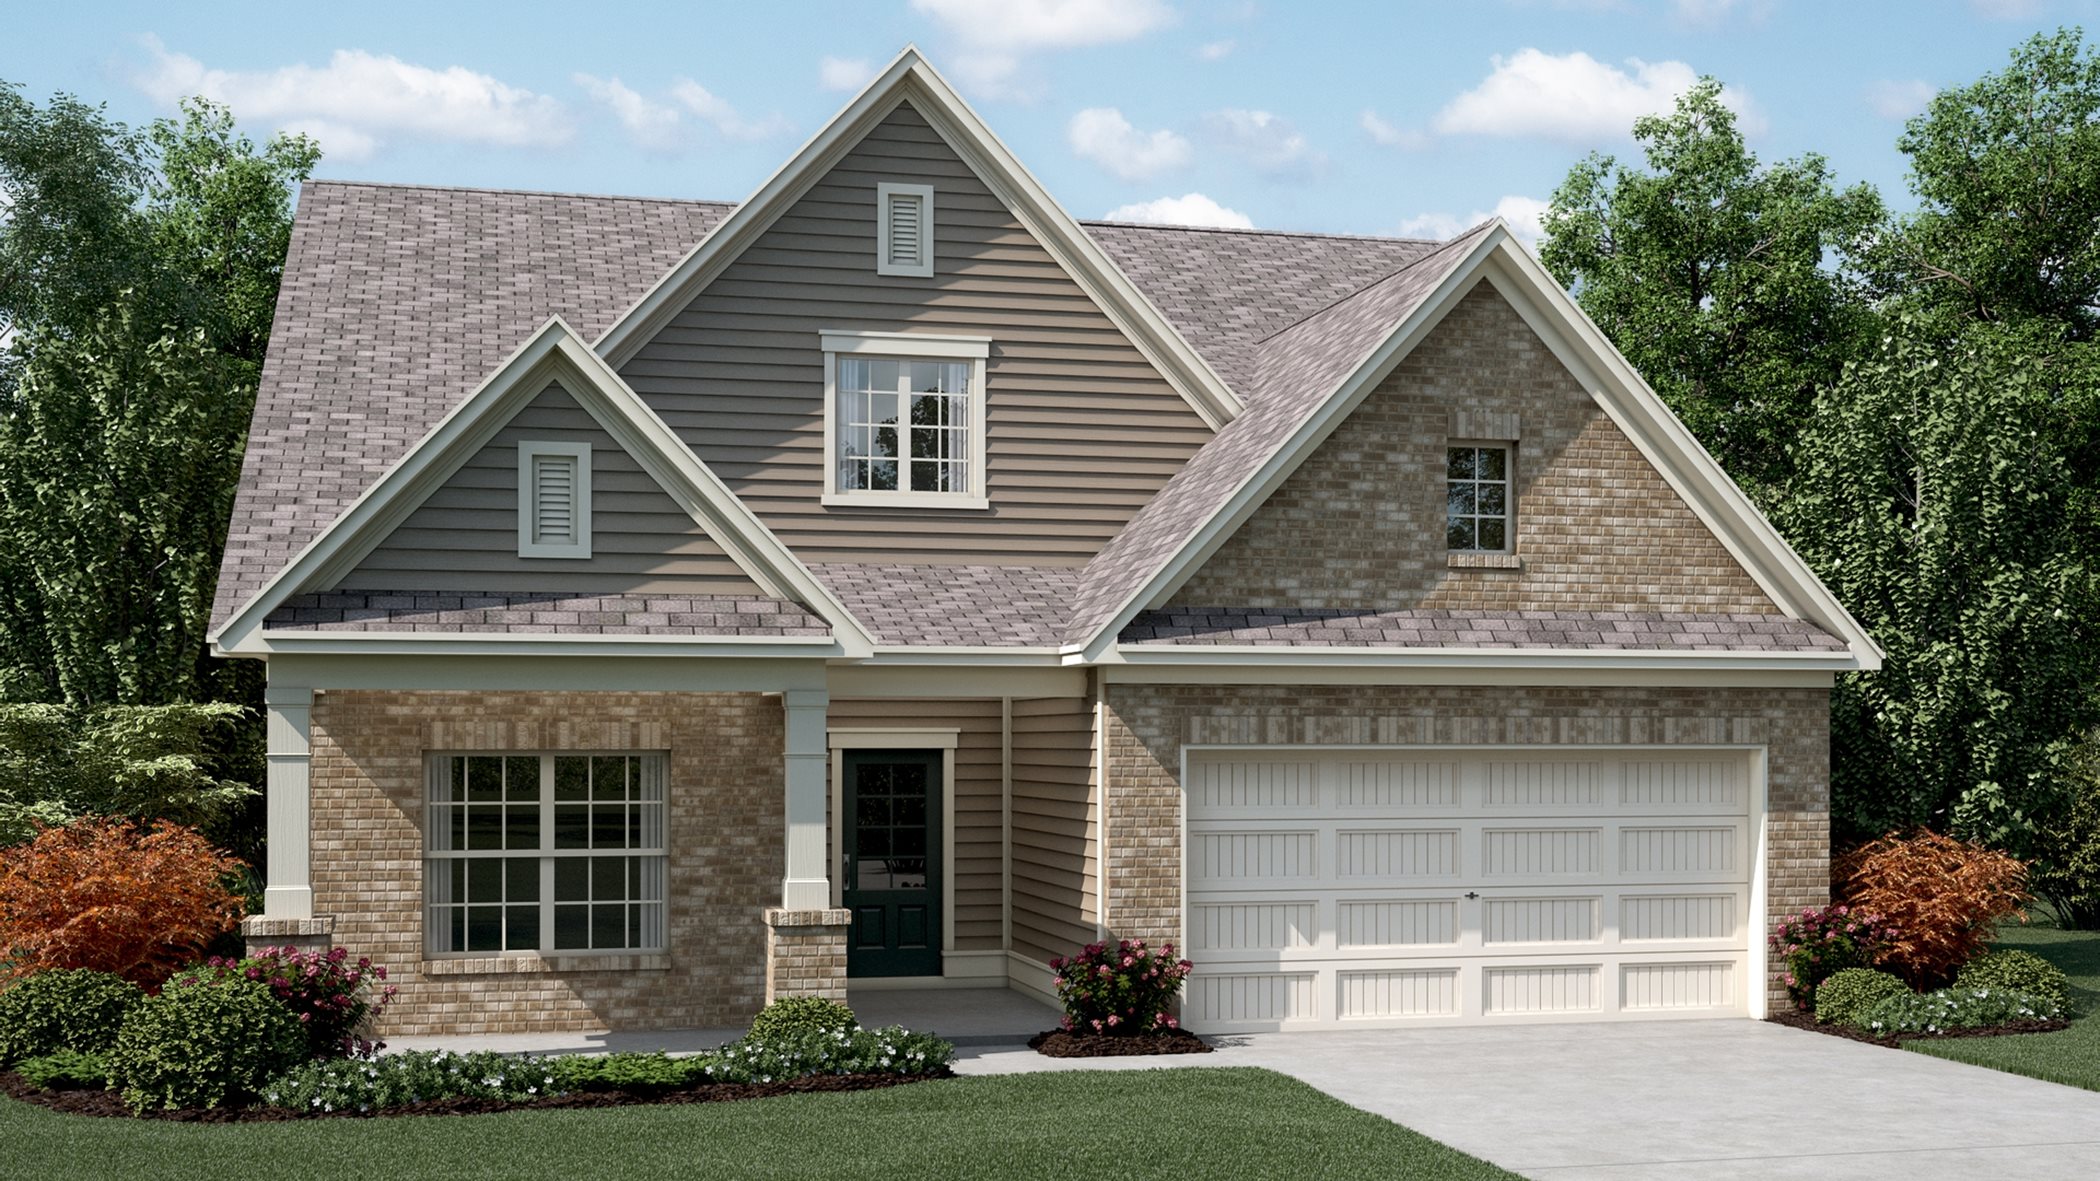 Image: Exterior rendering of Briarwood home at Fayette Meadows